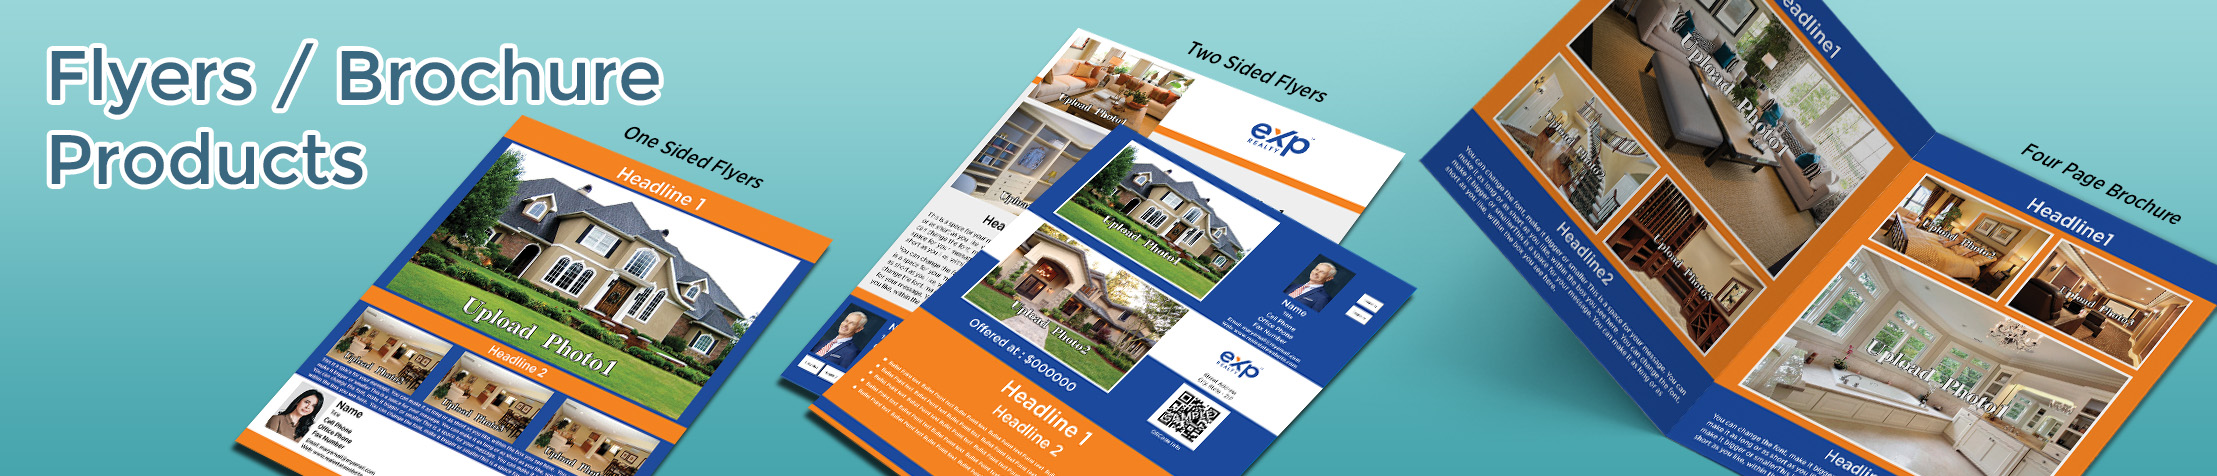  Real Estate Flyers and Brochures - flyer and brochure templates for open houses and marketing | BestPrintBuy.com